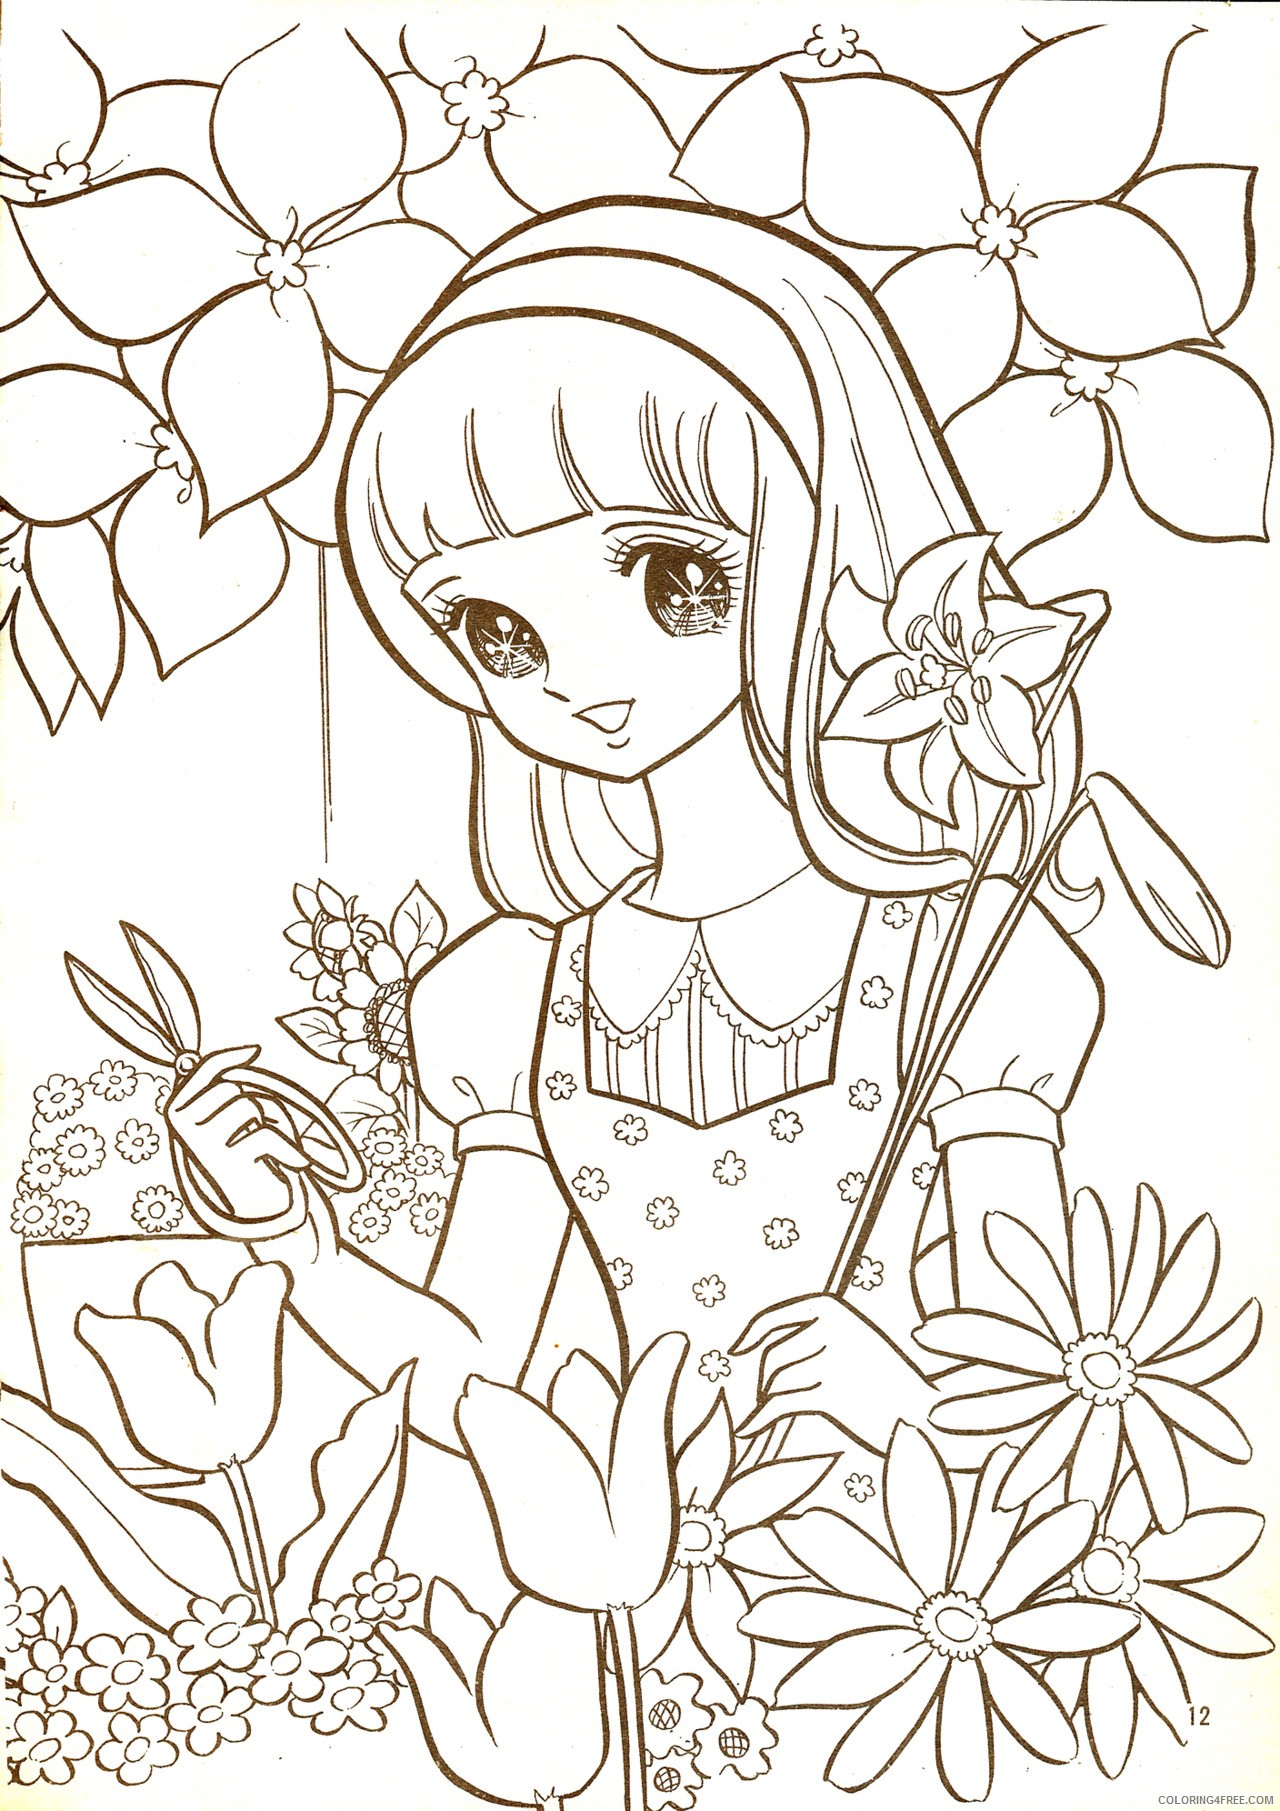 manga coloring pages in flower garden Coloring4free